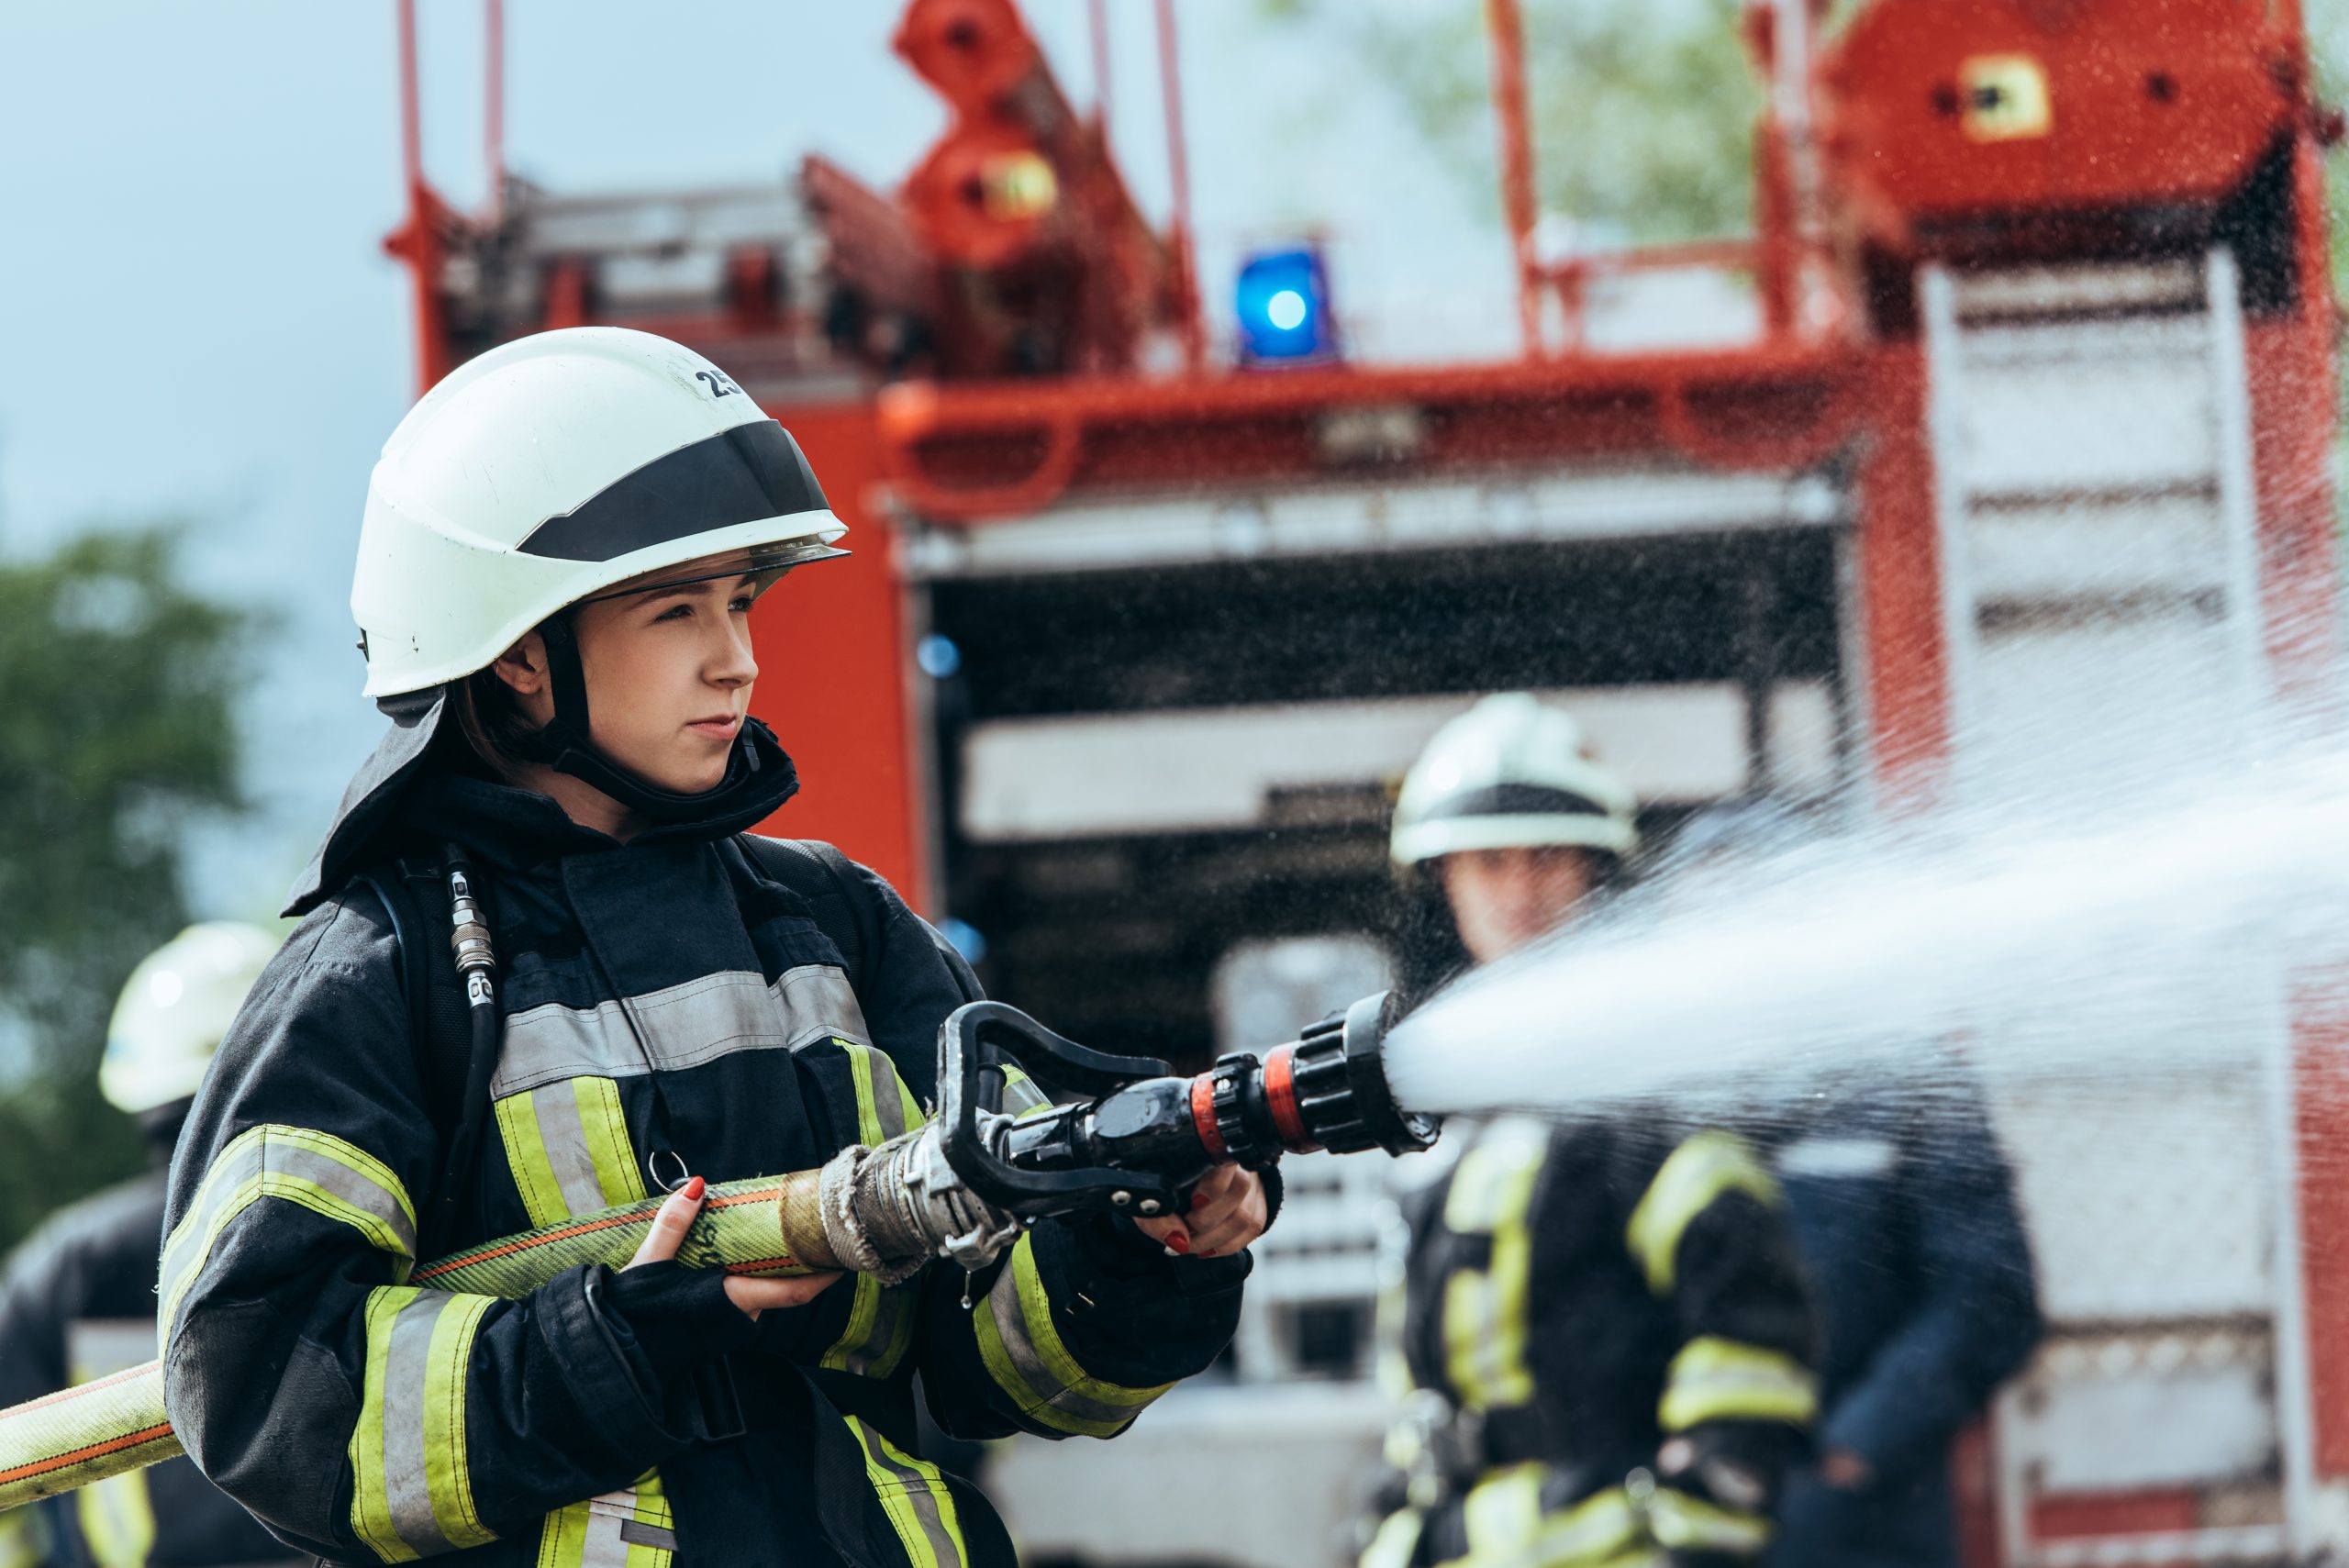 female firefighter with water hose extinguishing fire on street